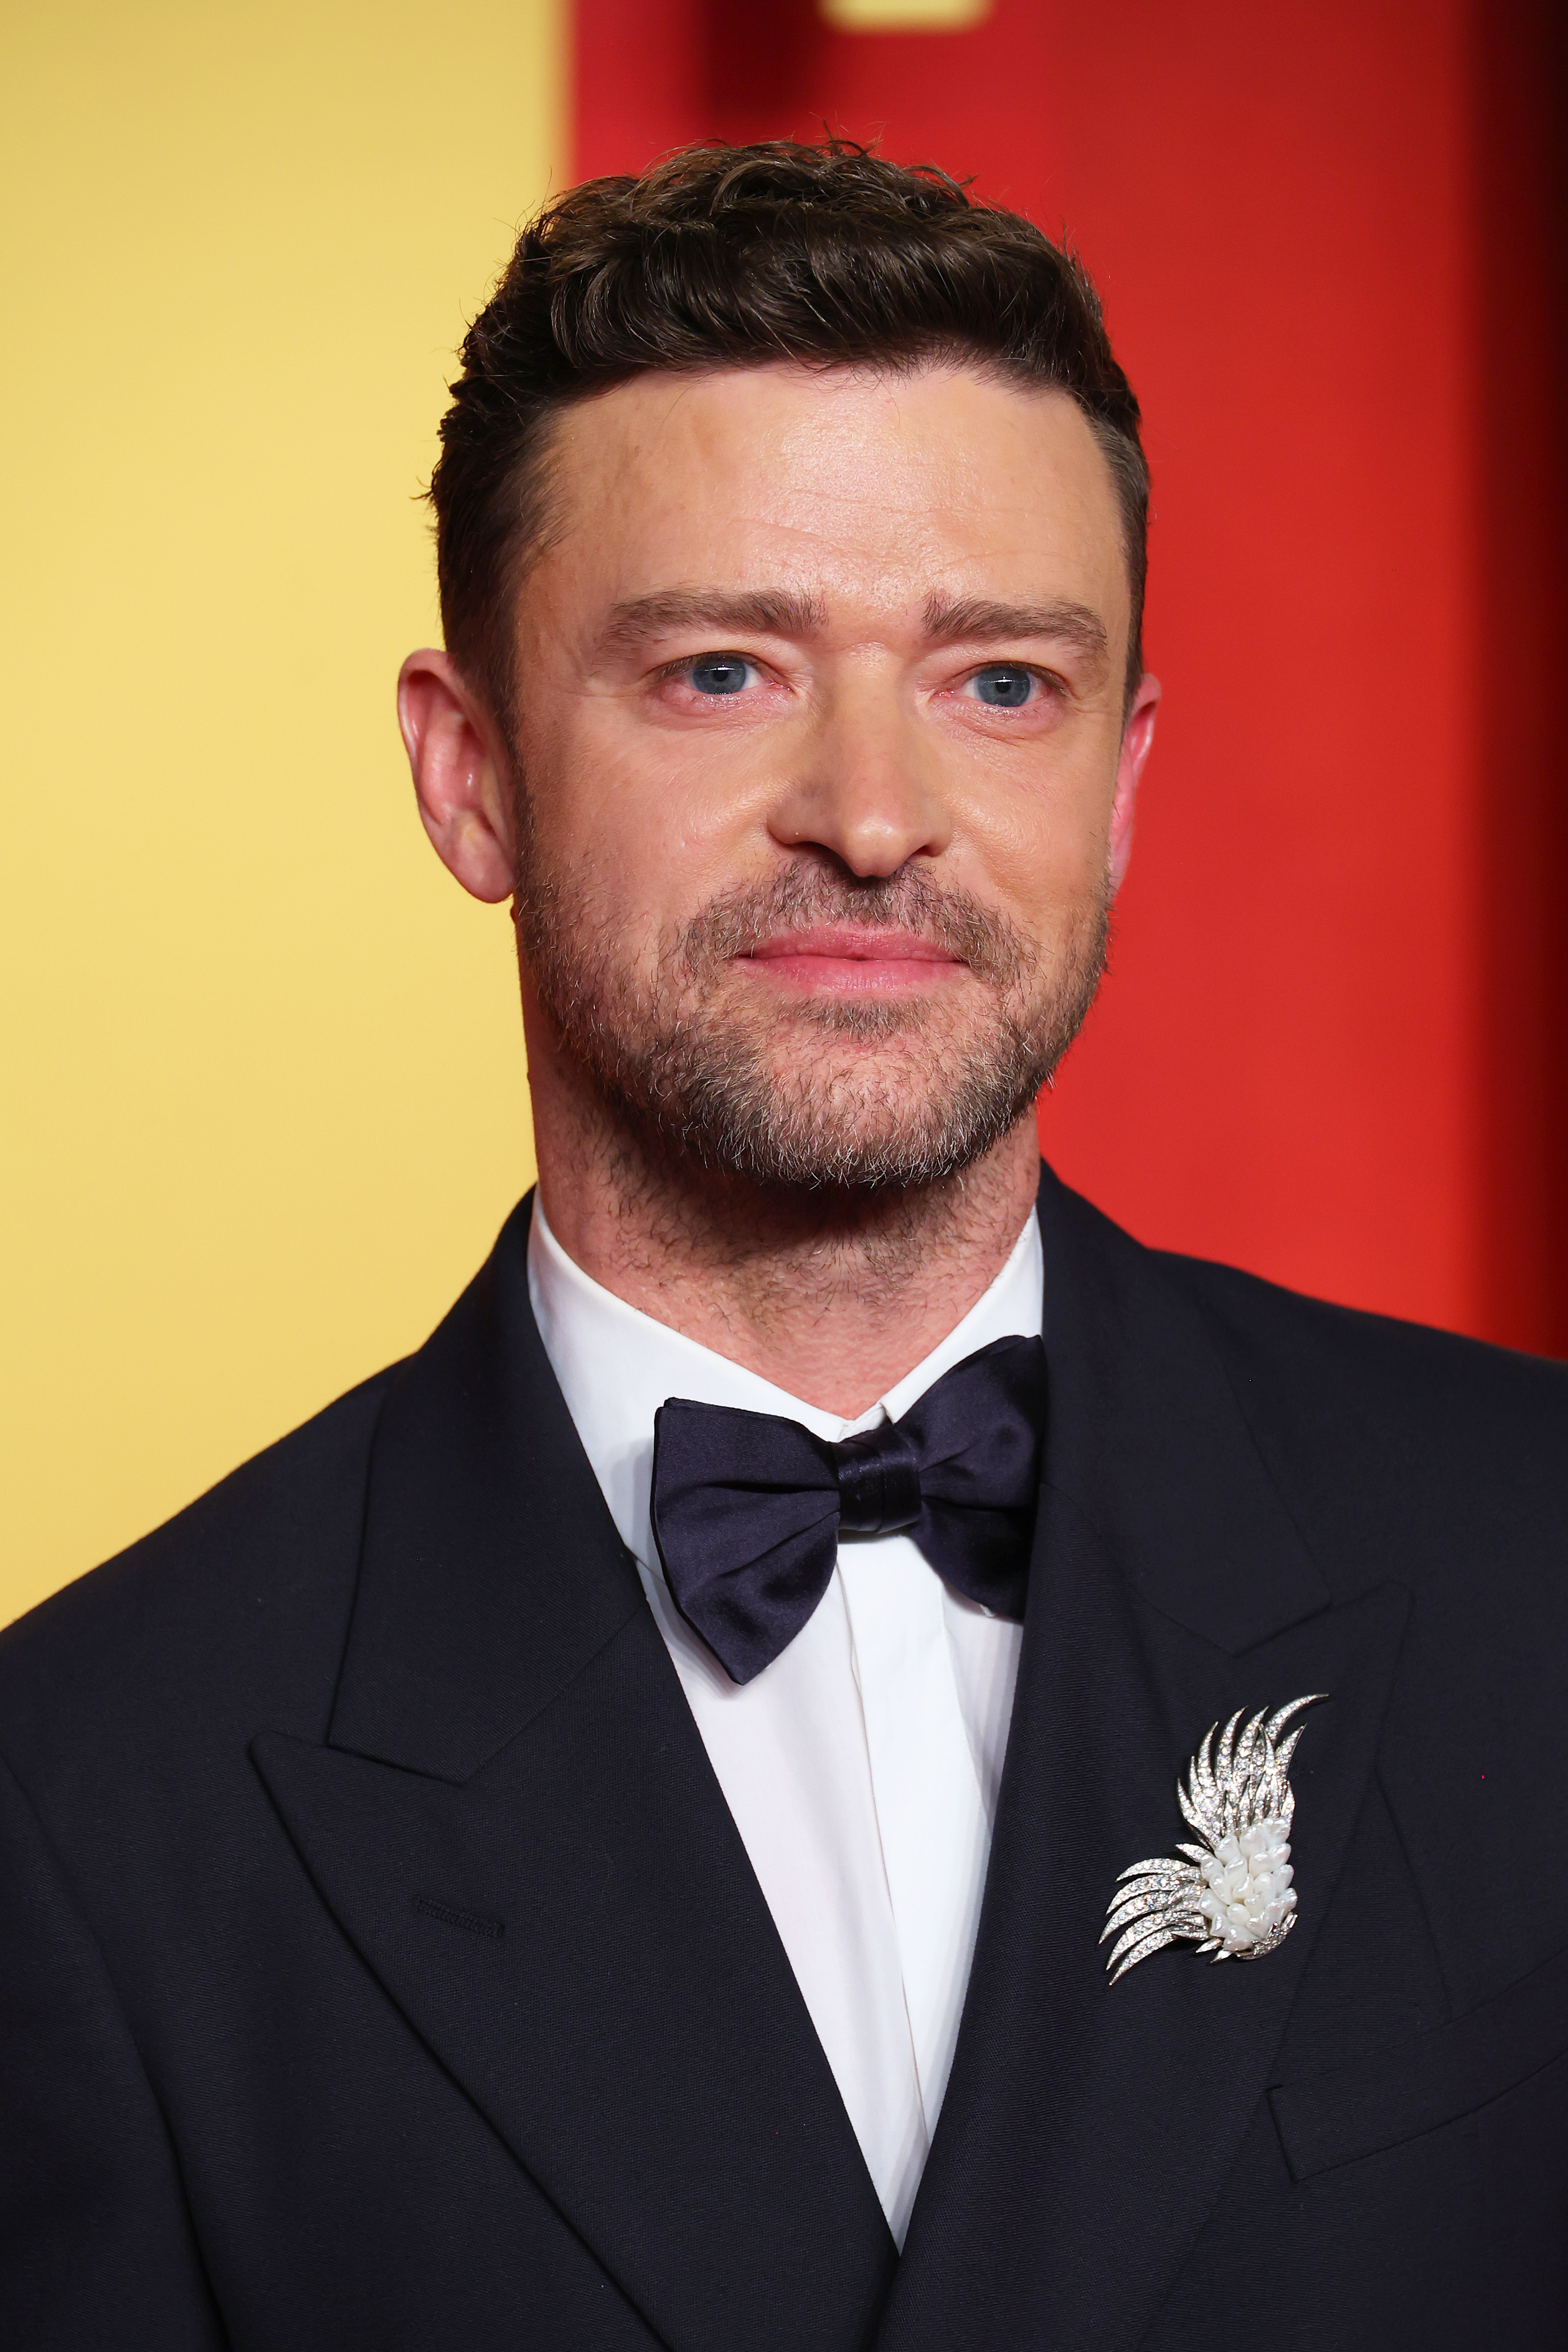 Justin Timberlake dressed in a black tuxedo with a bow tie and decorative brooch at a red carpet event